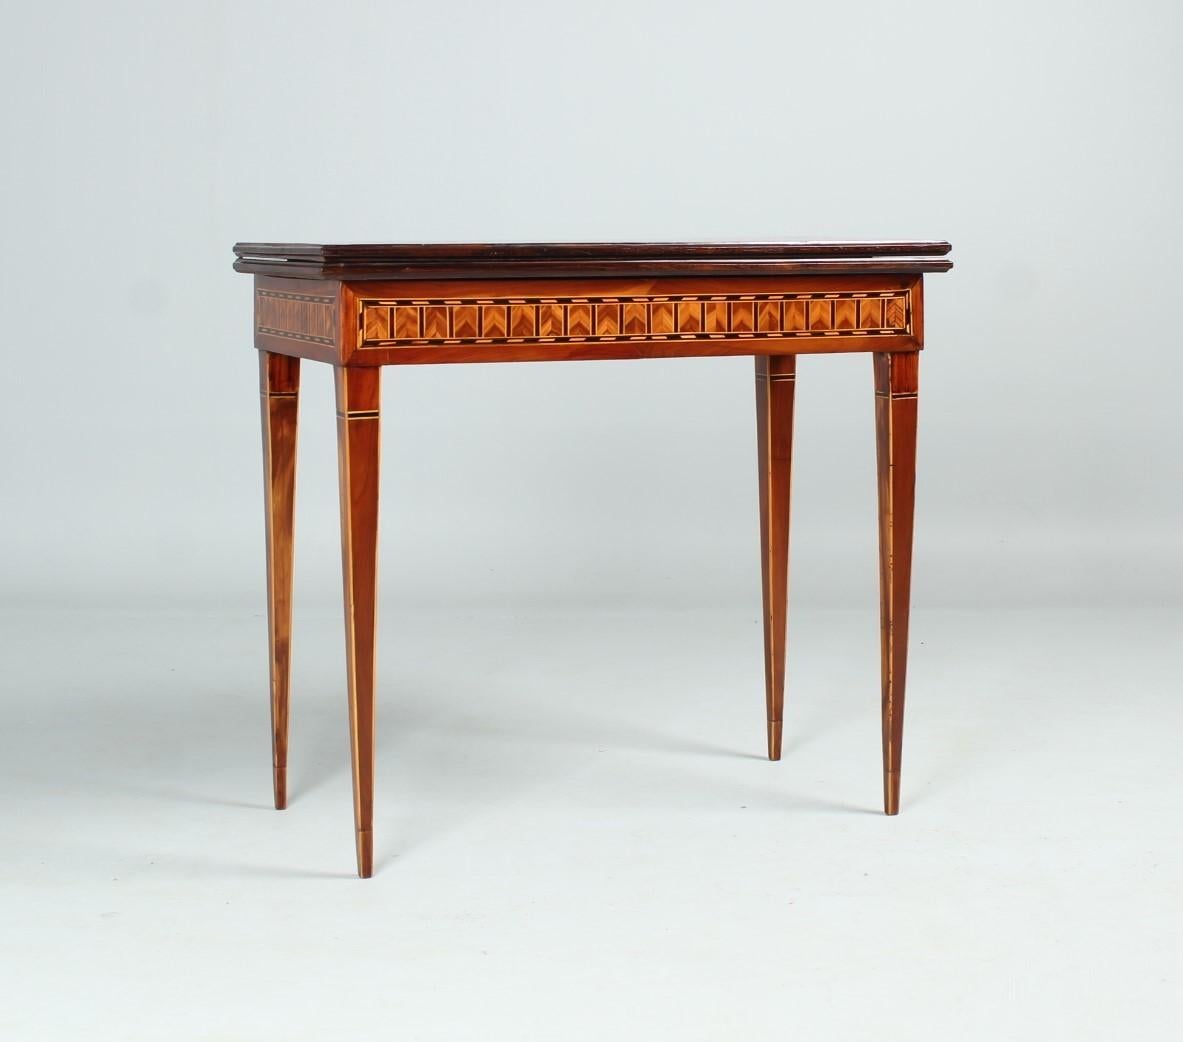 South-West Germany
Plum wood u.a.
around 1800

Dimensions: approx. H x D x D: 76 x 86 x 43 cm

Description:
Antique console with rich marquetry and hinged playfield. Particularly rare is the all-over veneer in plum wood. Maple and ebony set